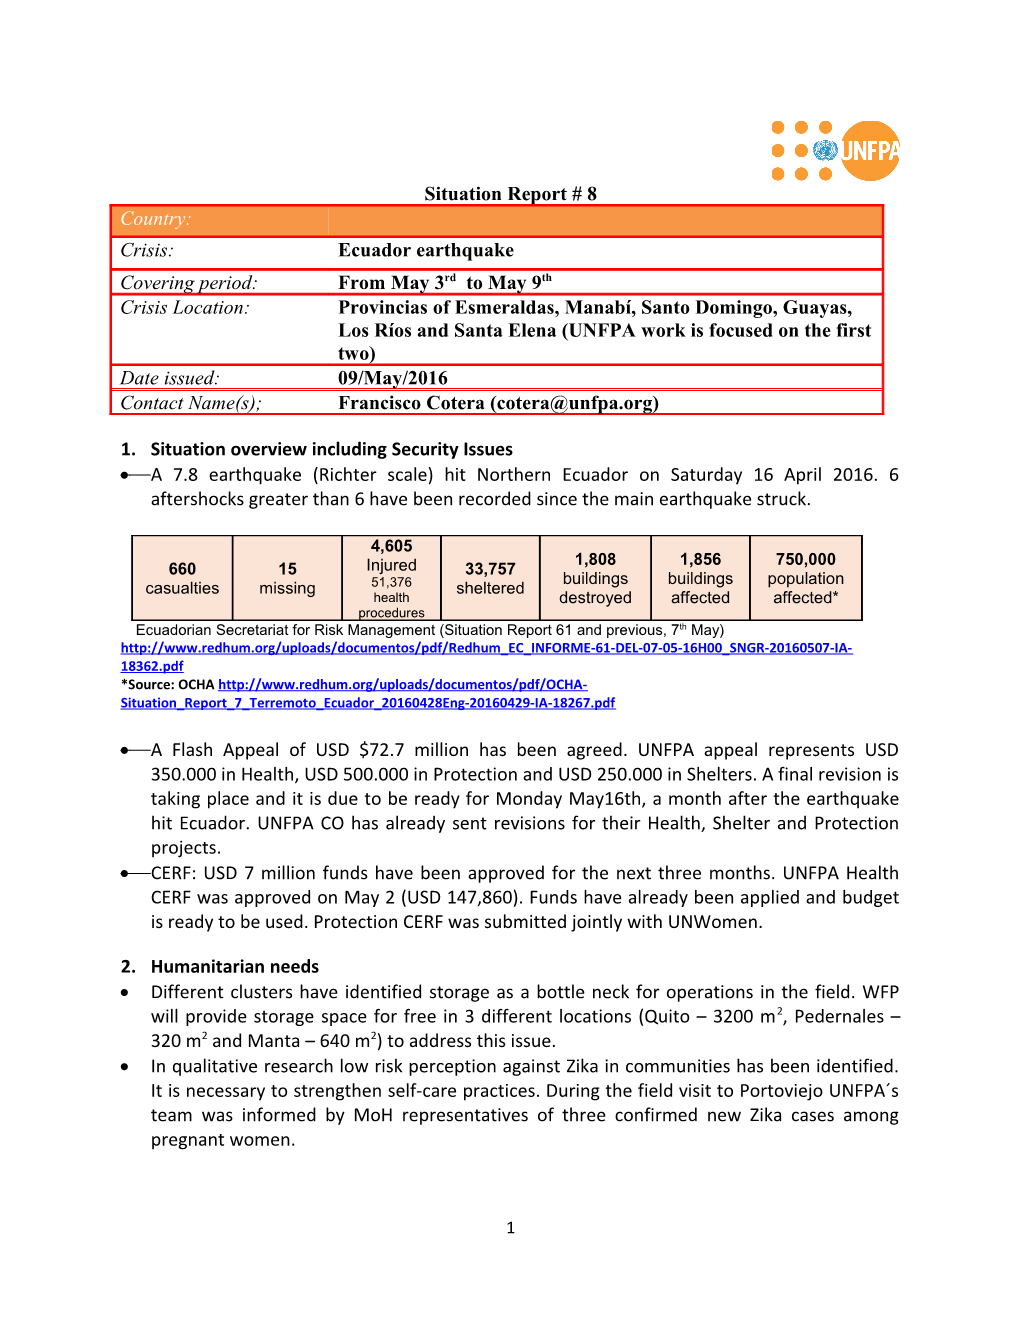 The UNFPA Standard Operating Procedures for Humanitarian Settings